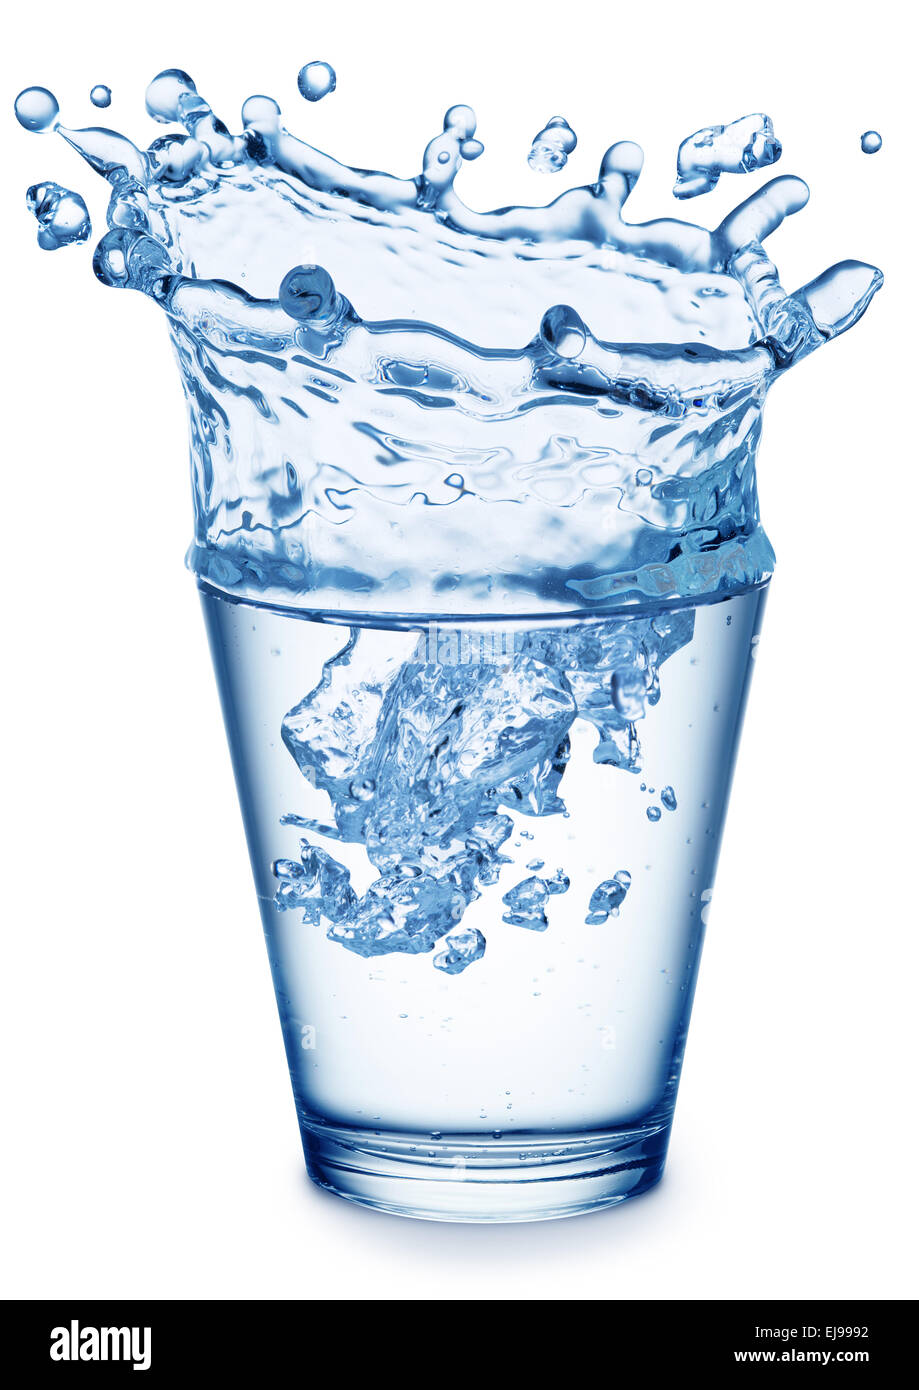 Splash of water in the shape of crown in the glass. File contains clipping paths. Stock Photo